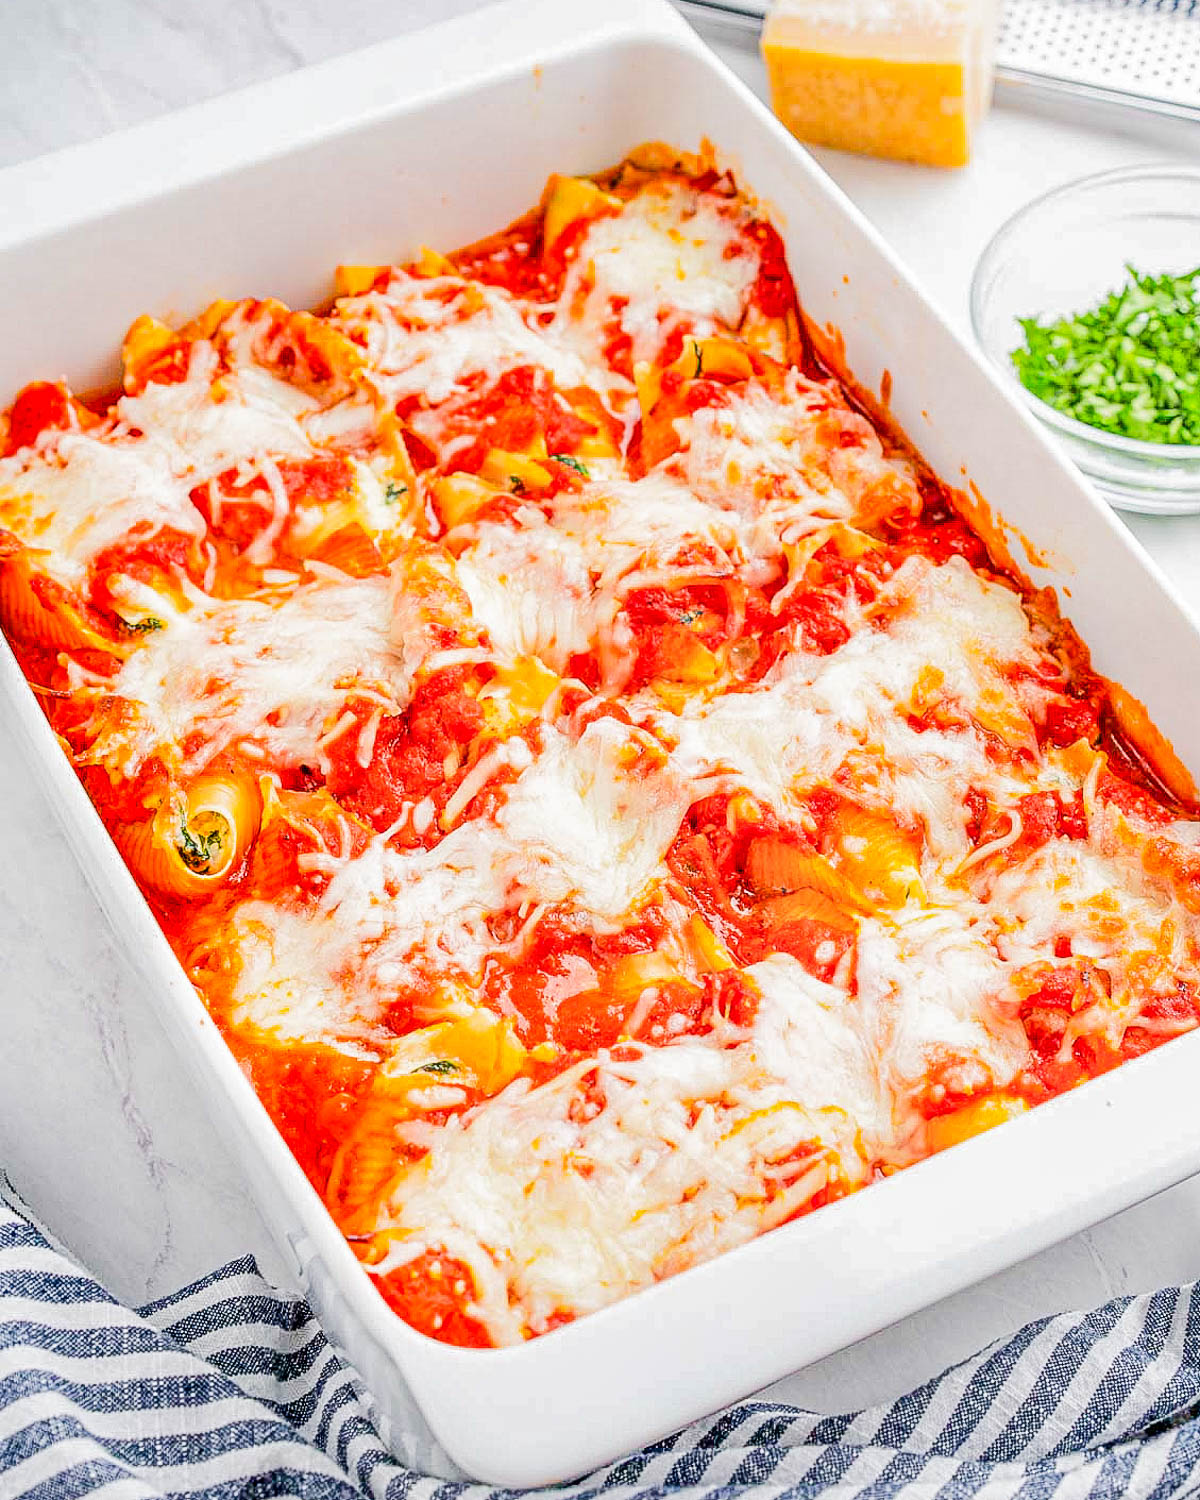 A dish of baked stuffed shells with melted cheese and tomato sauce in a white casserole.